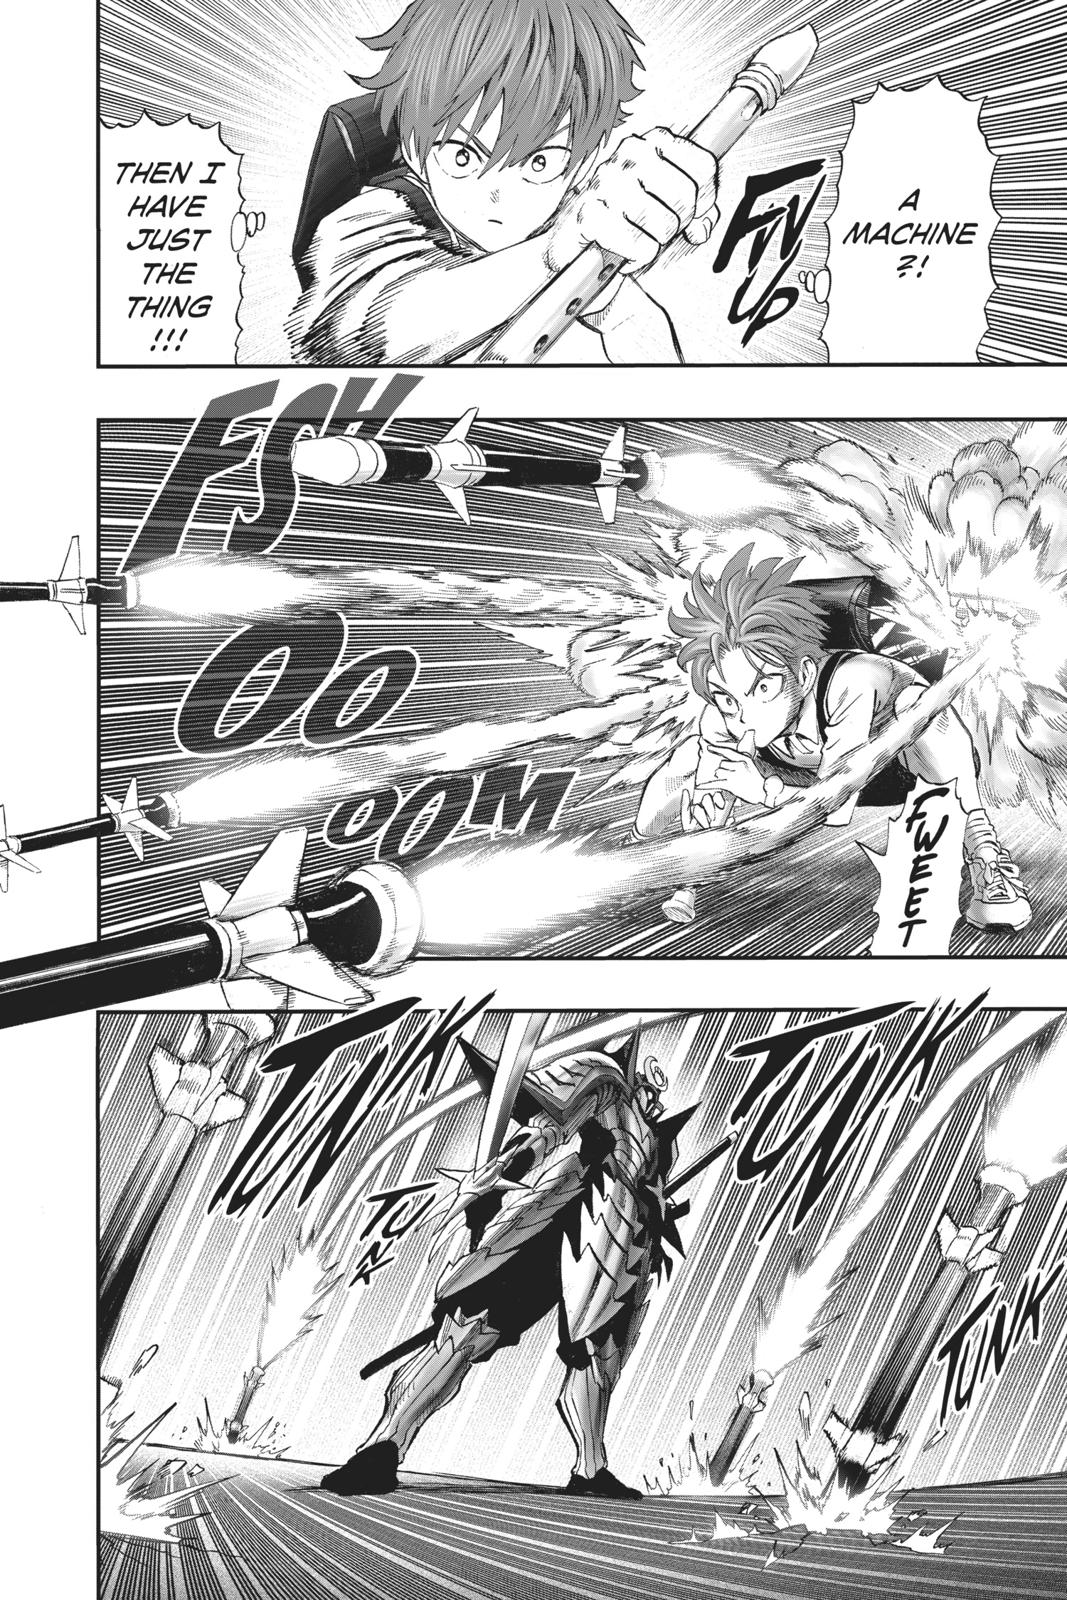 One-Punch Man, Punch 100 image 30